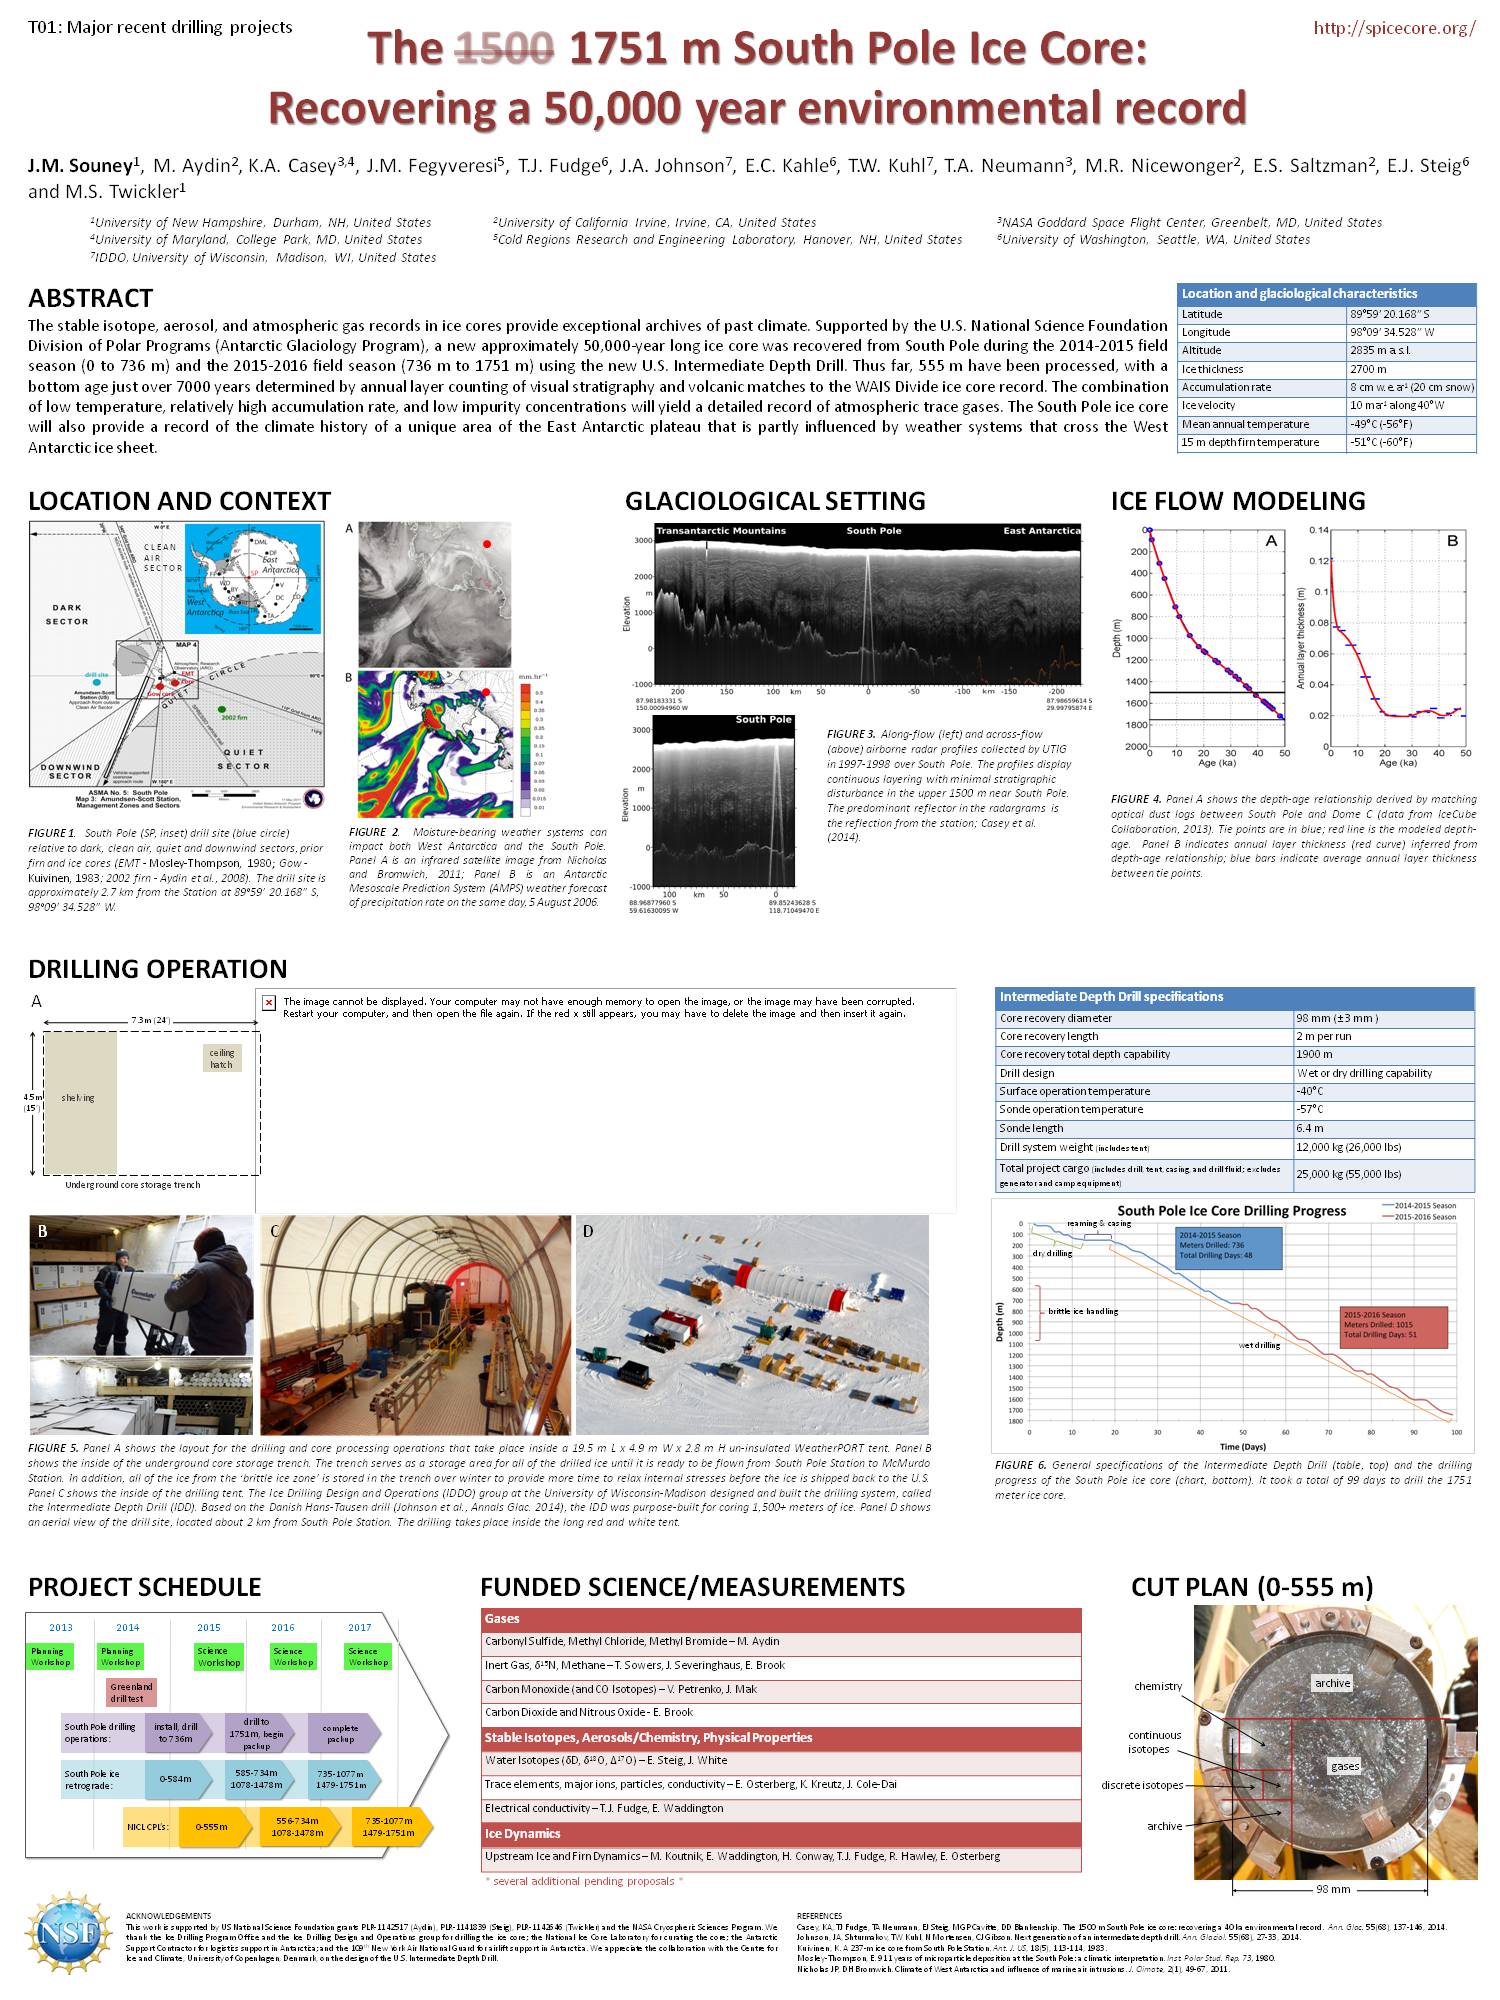 South Pole Ice Core Poster For Ipics 2nd Open Science Conference by jmsouney